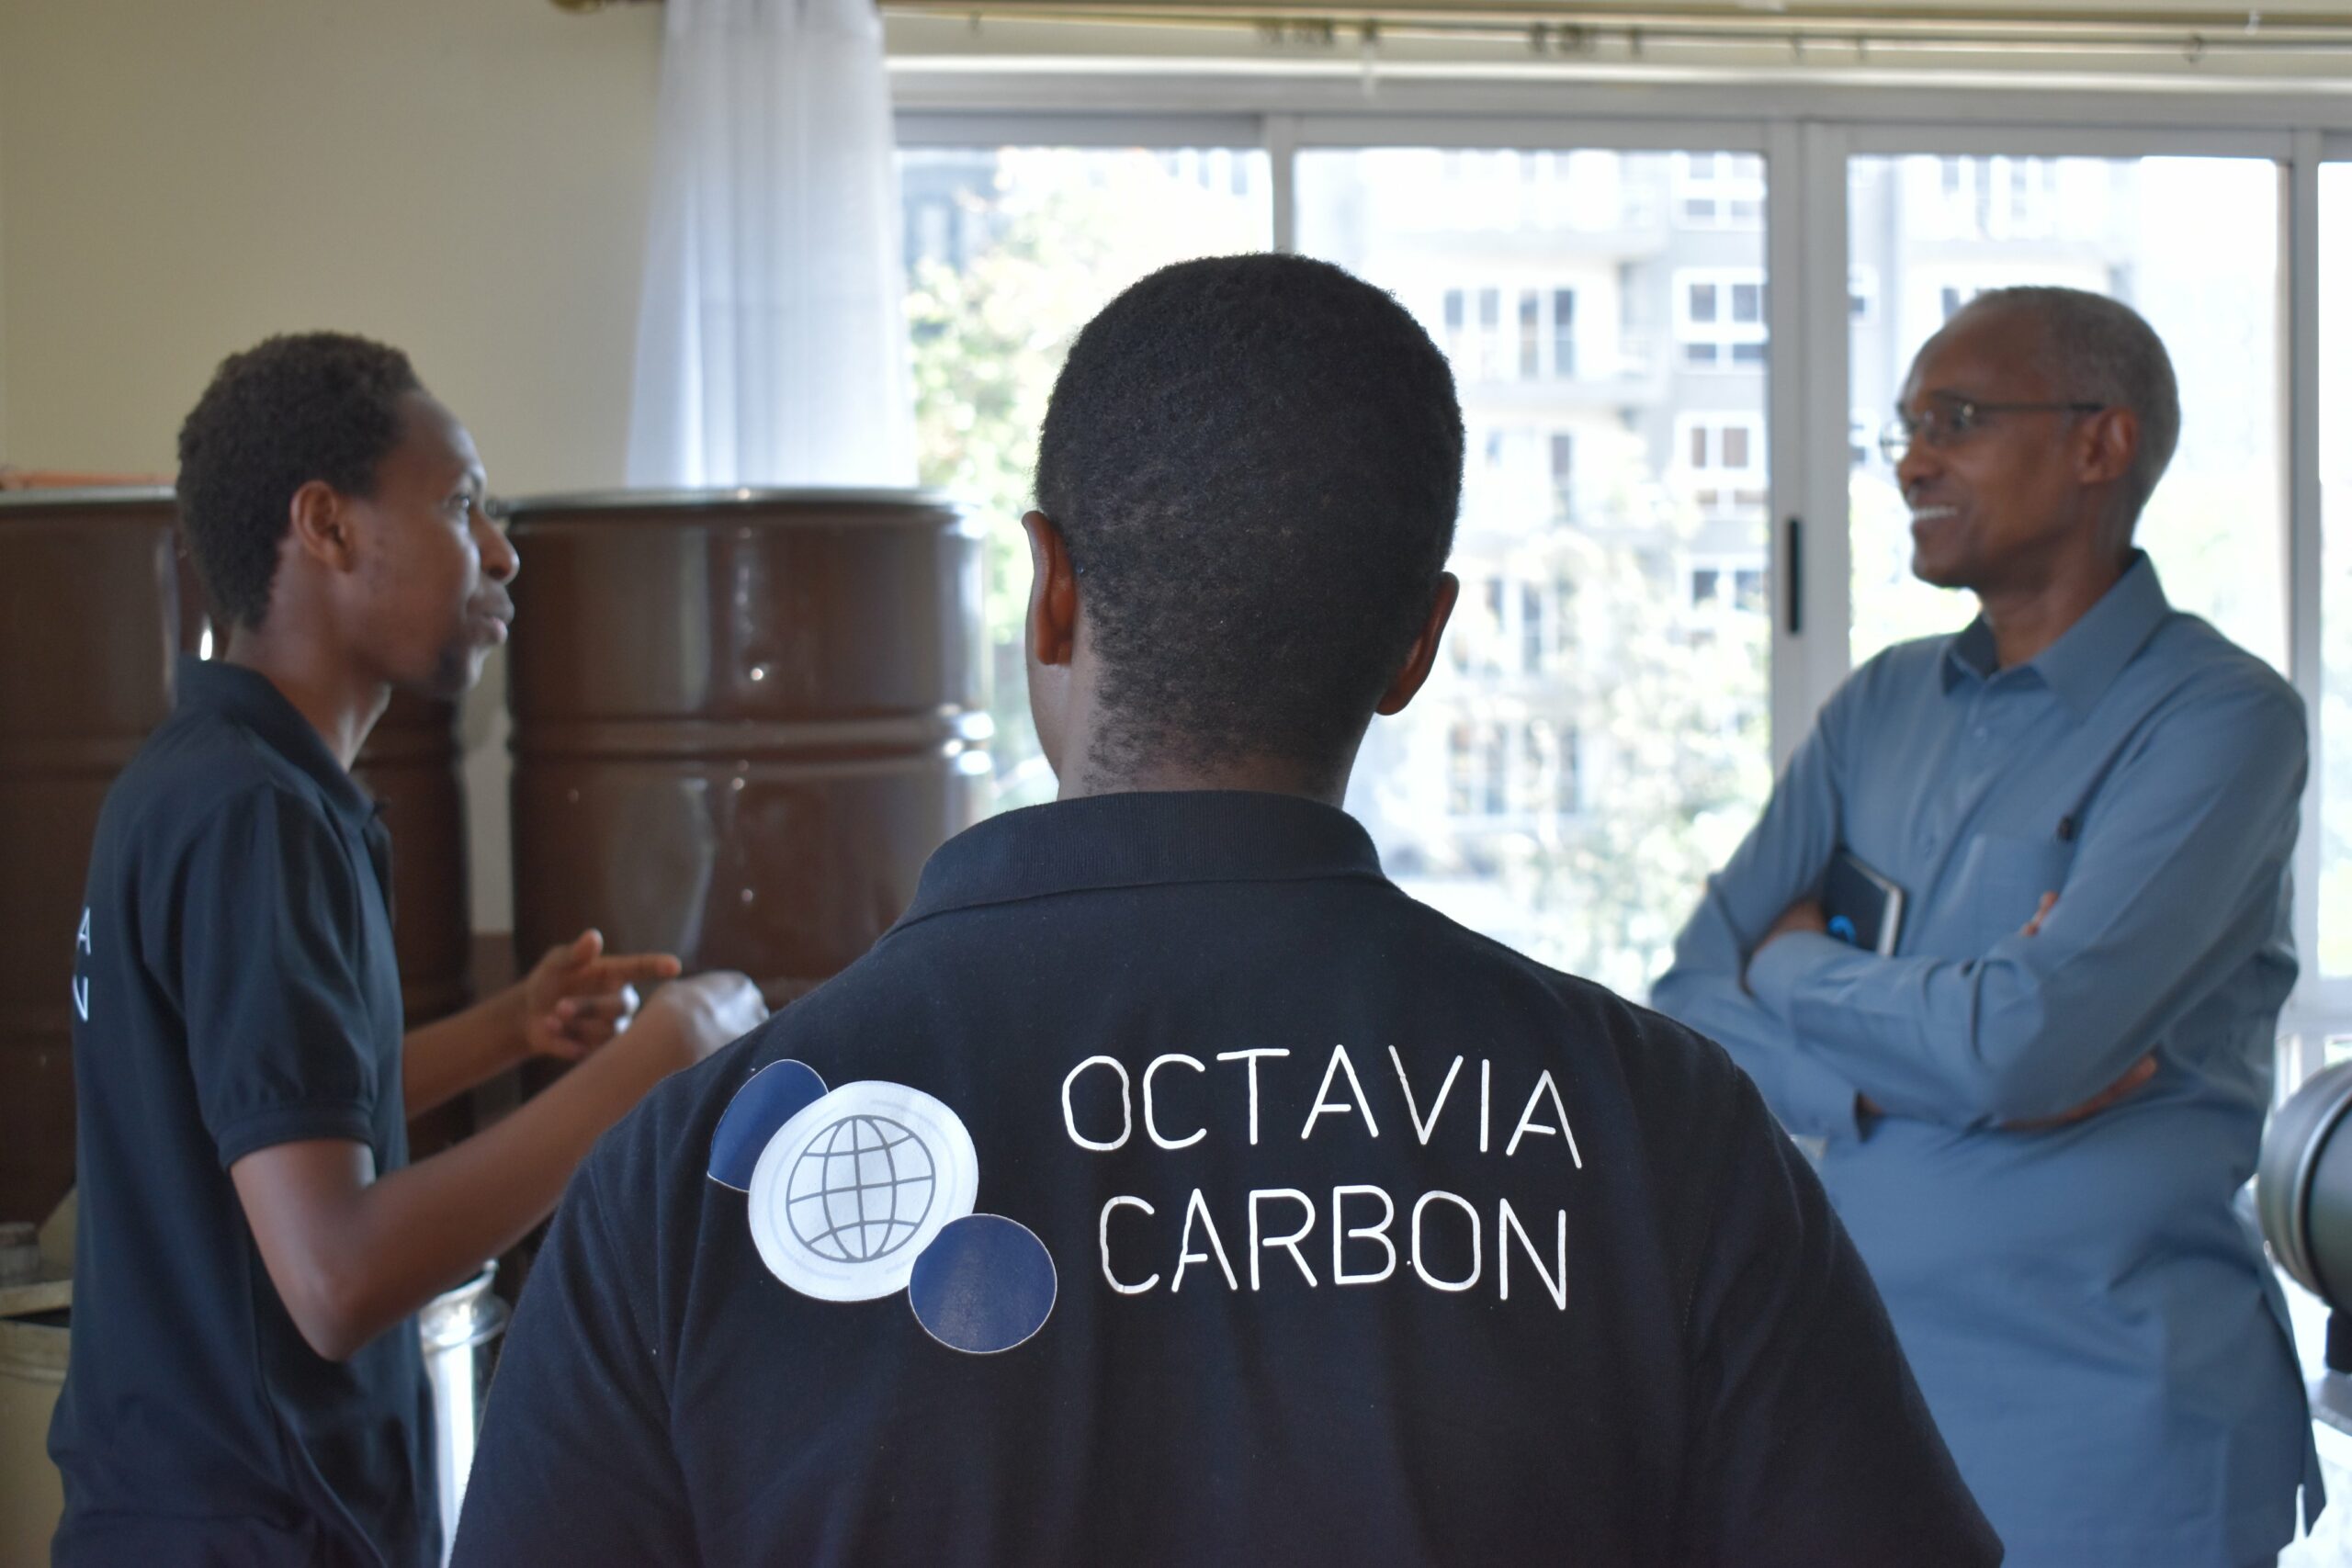 Octavia Carbon has received funding to develop its Direct Air Capture(DAC) technology that will enable the company to reduce carbon emissions.